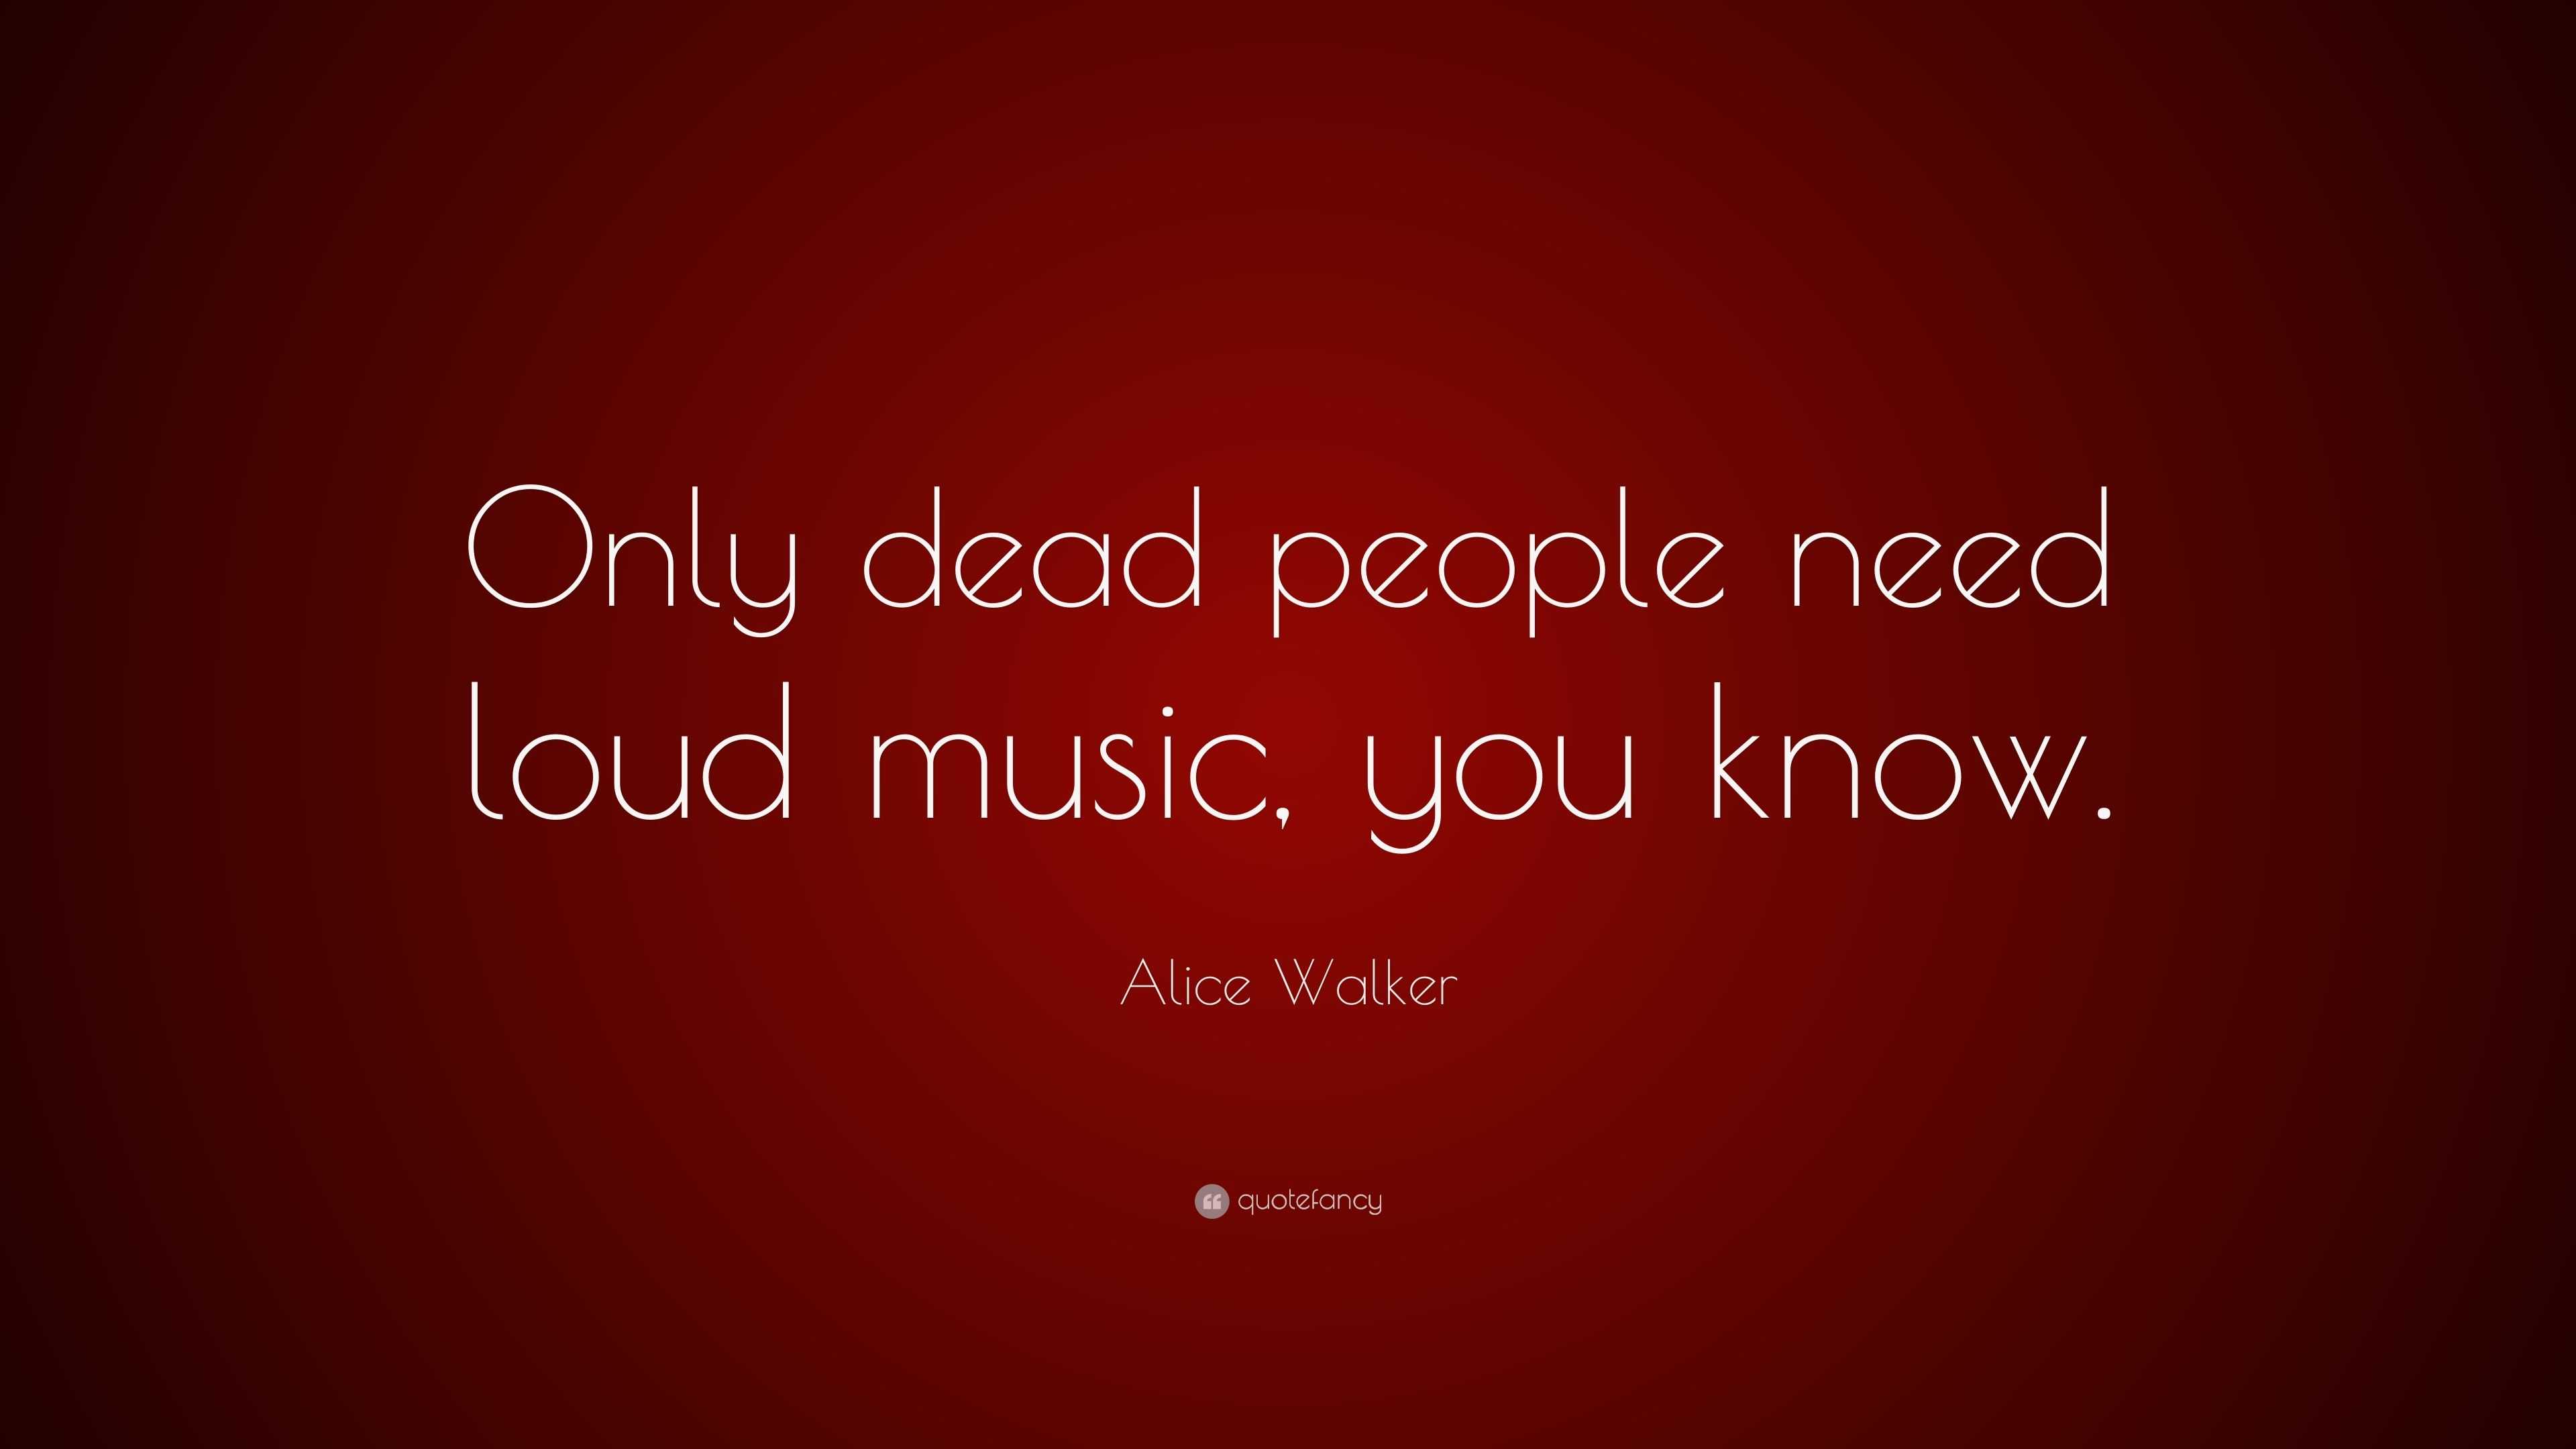 Alice Walker Quote: “Only dead people need loud music, you know.”